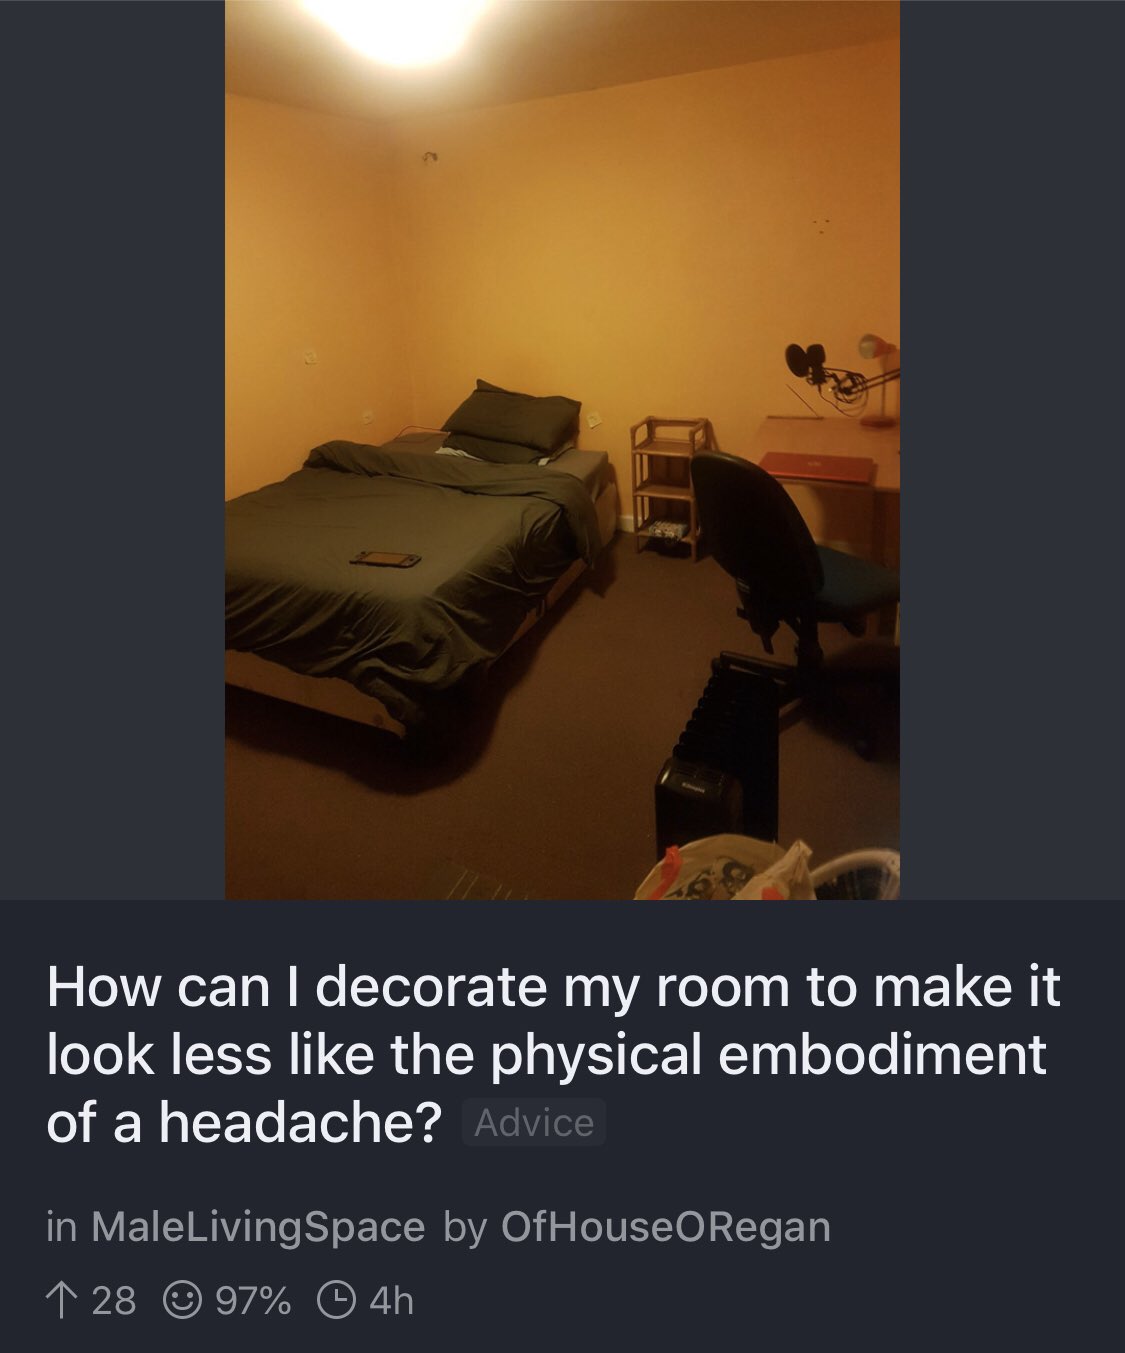 presentation - How can I decorate my room to make it look less the physical embodiment of a headache? Advice in MaleLivingSpace by OfHouseORegan 1 28 97% 0 4h